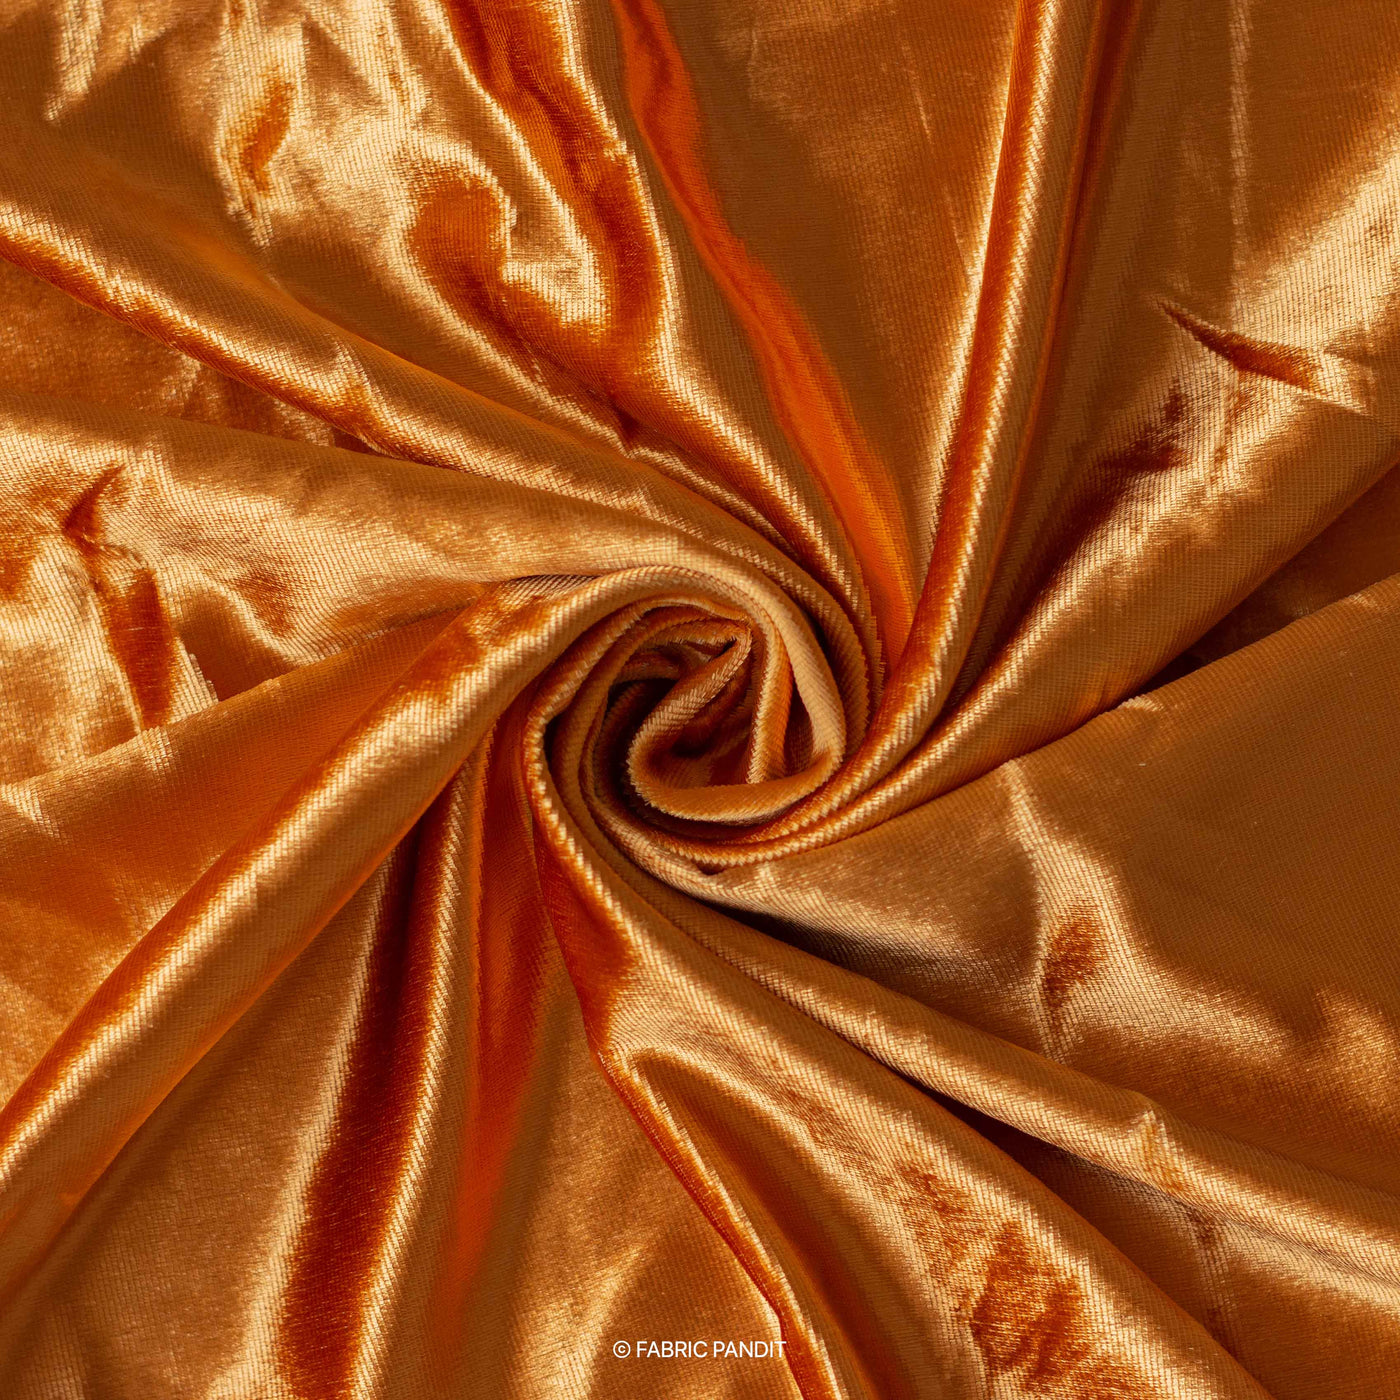 Fabric Pandit Bright Golden Yellow Color Pure Velvet Fabric (Width 44 Inches)